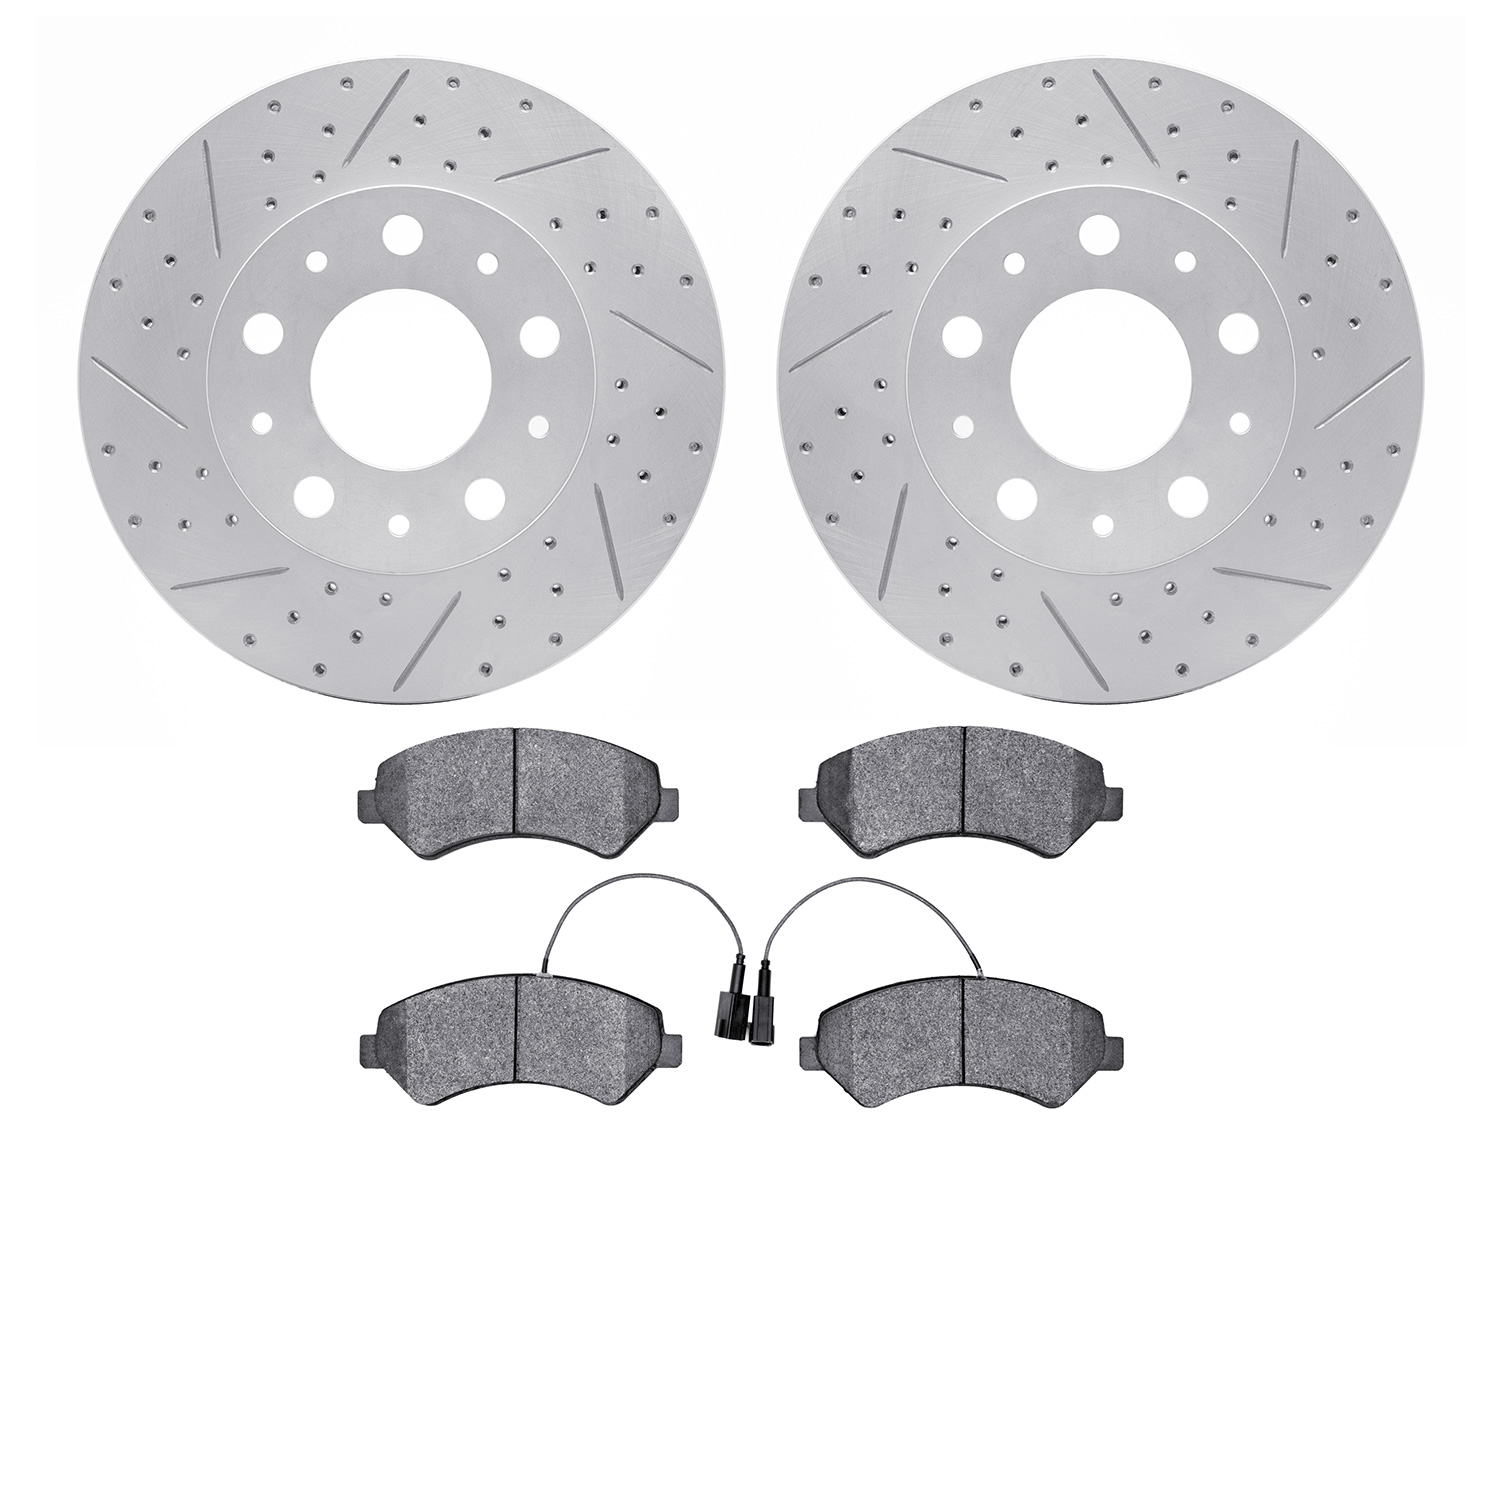 2202-40078 Geoperformance Drilled/Slotted Rotors w/Heavy-Duty Pads Kit, Fits Select Mopar, Position: Front